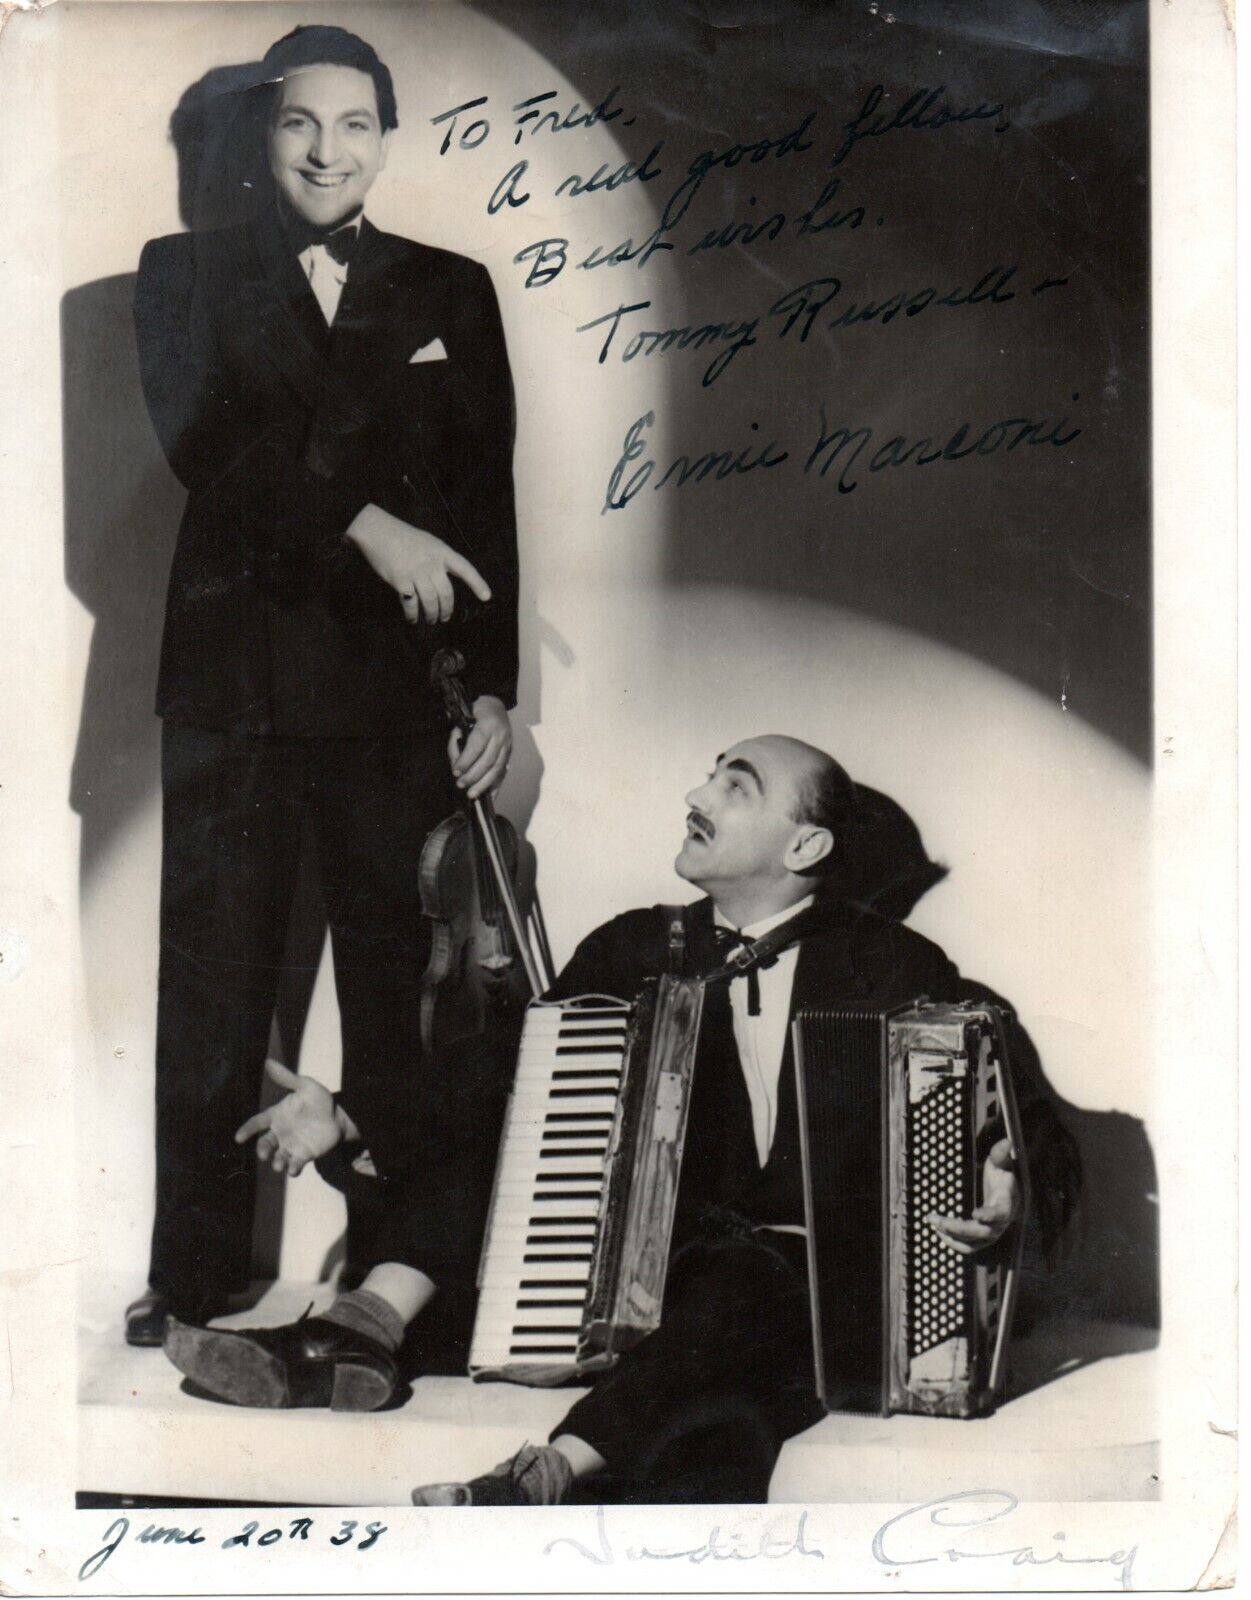 TOMMY RUSSELL & ERNIE MARCONI HAND SIGNED VINTAGE Photo Poster painting 10X8 MUSIC HALL ACT